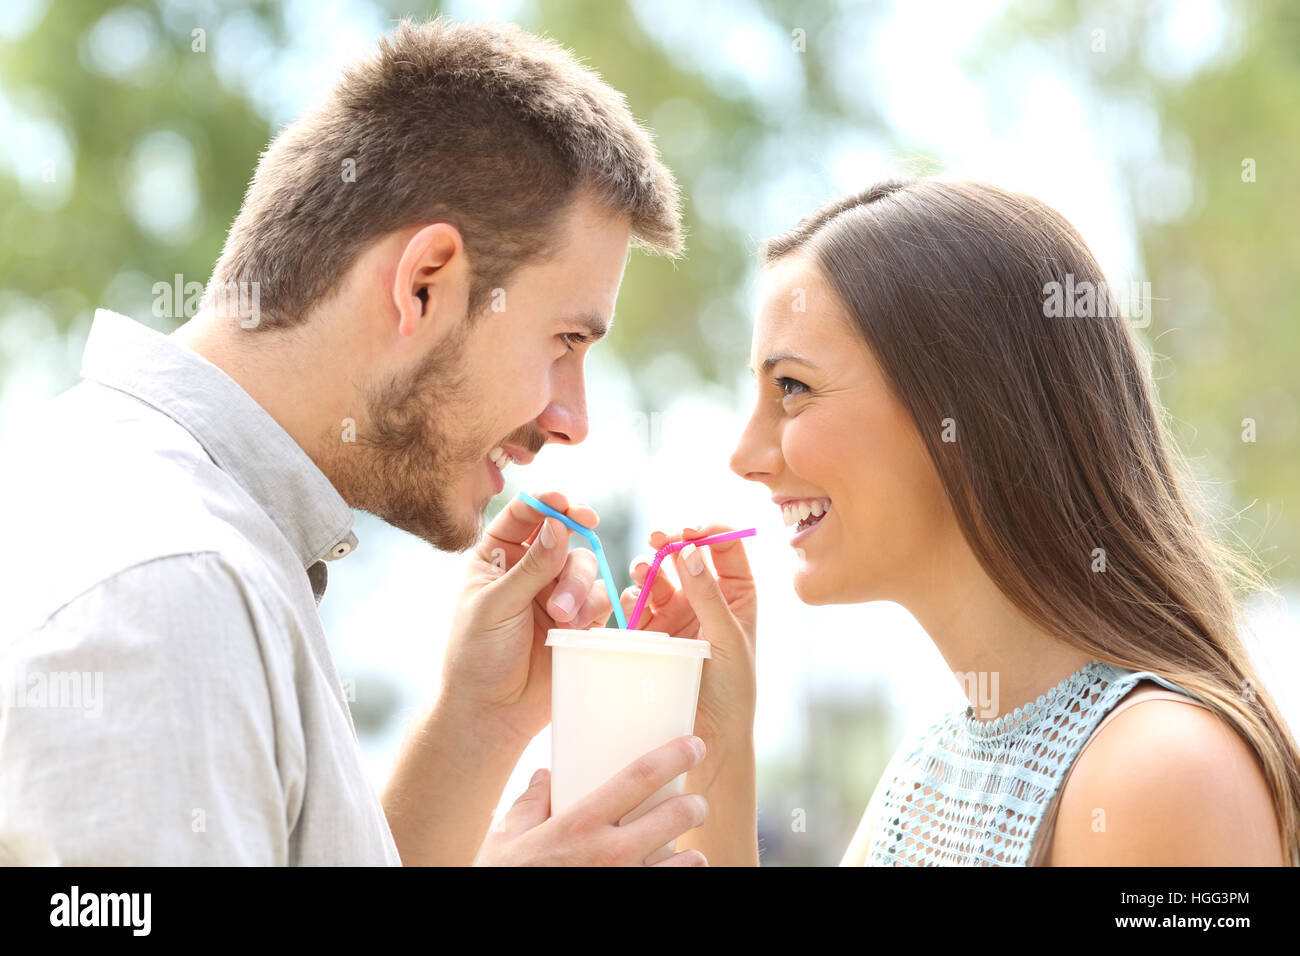 Side view of a happy couple falling in love and sharing a drink Stock Photo